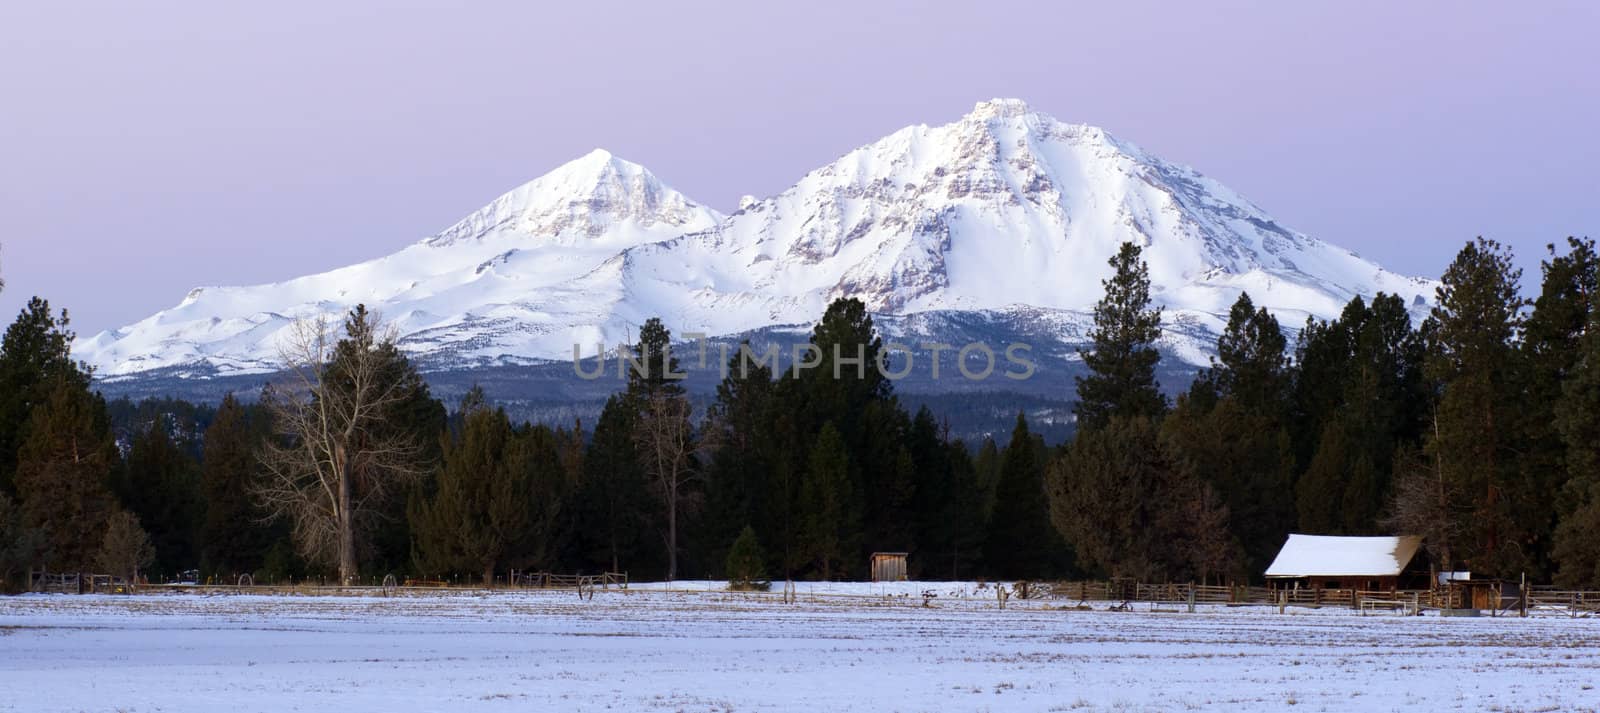 Homestead Ranch at the Base of Three Sisters Mountains Oregon by ChrisBoswell